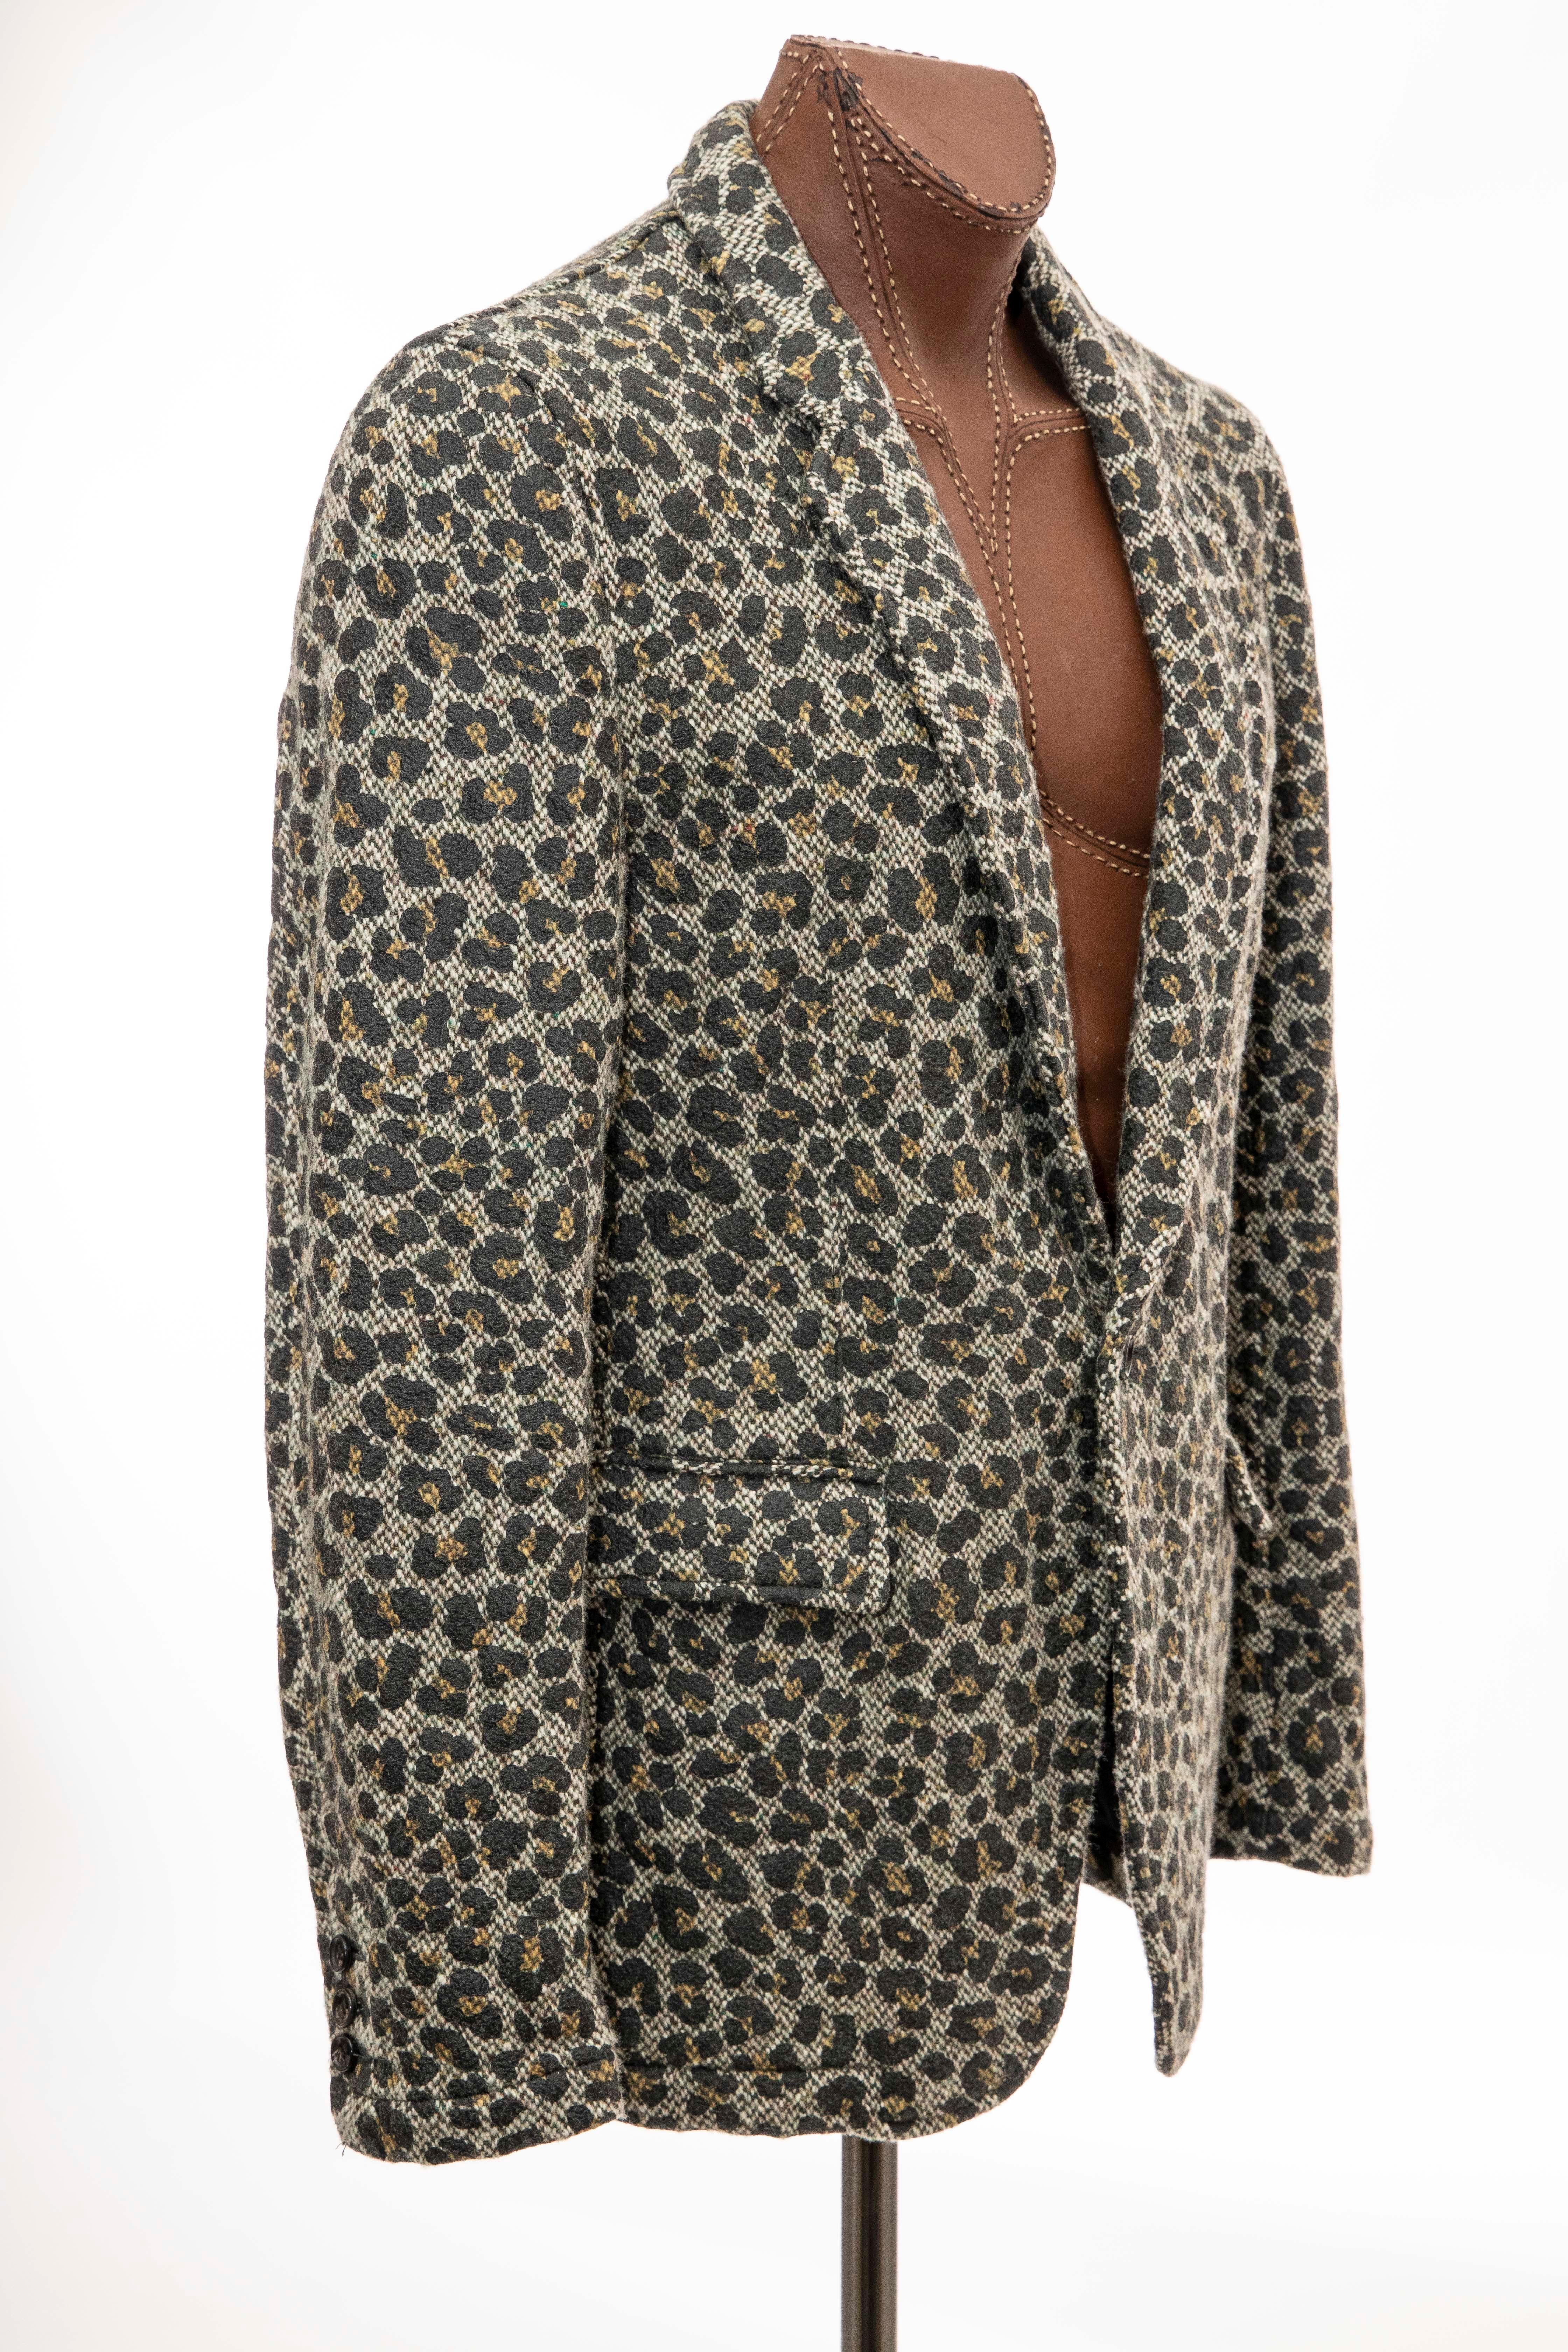 Comme des Garçons Homme Plus, Fall 2009 wool tweed leopard print  blazer with notched lapels, leopard print throughout, three exterior pockets, single vent, long sleeves, black cotton woven lining and one-button closure.

Japan: Large

Chest: 43.5,